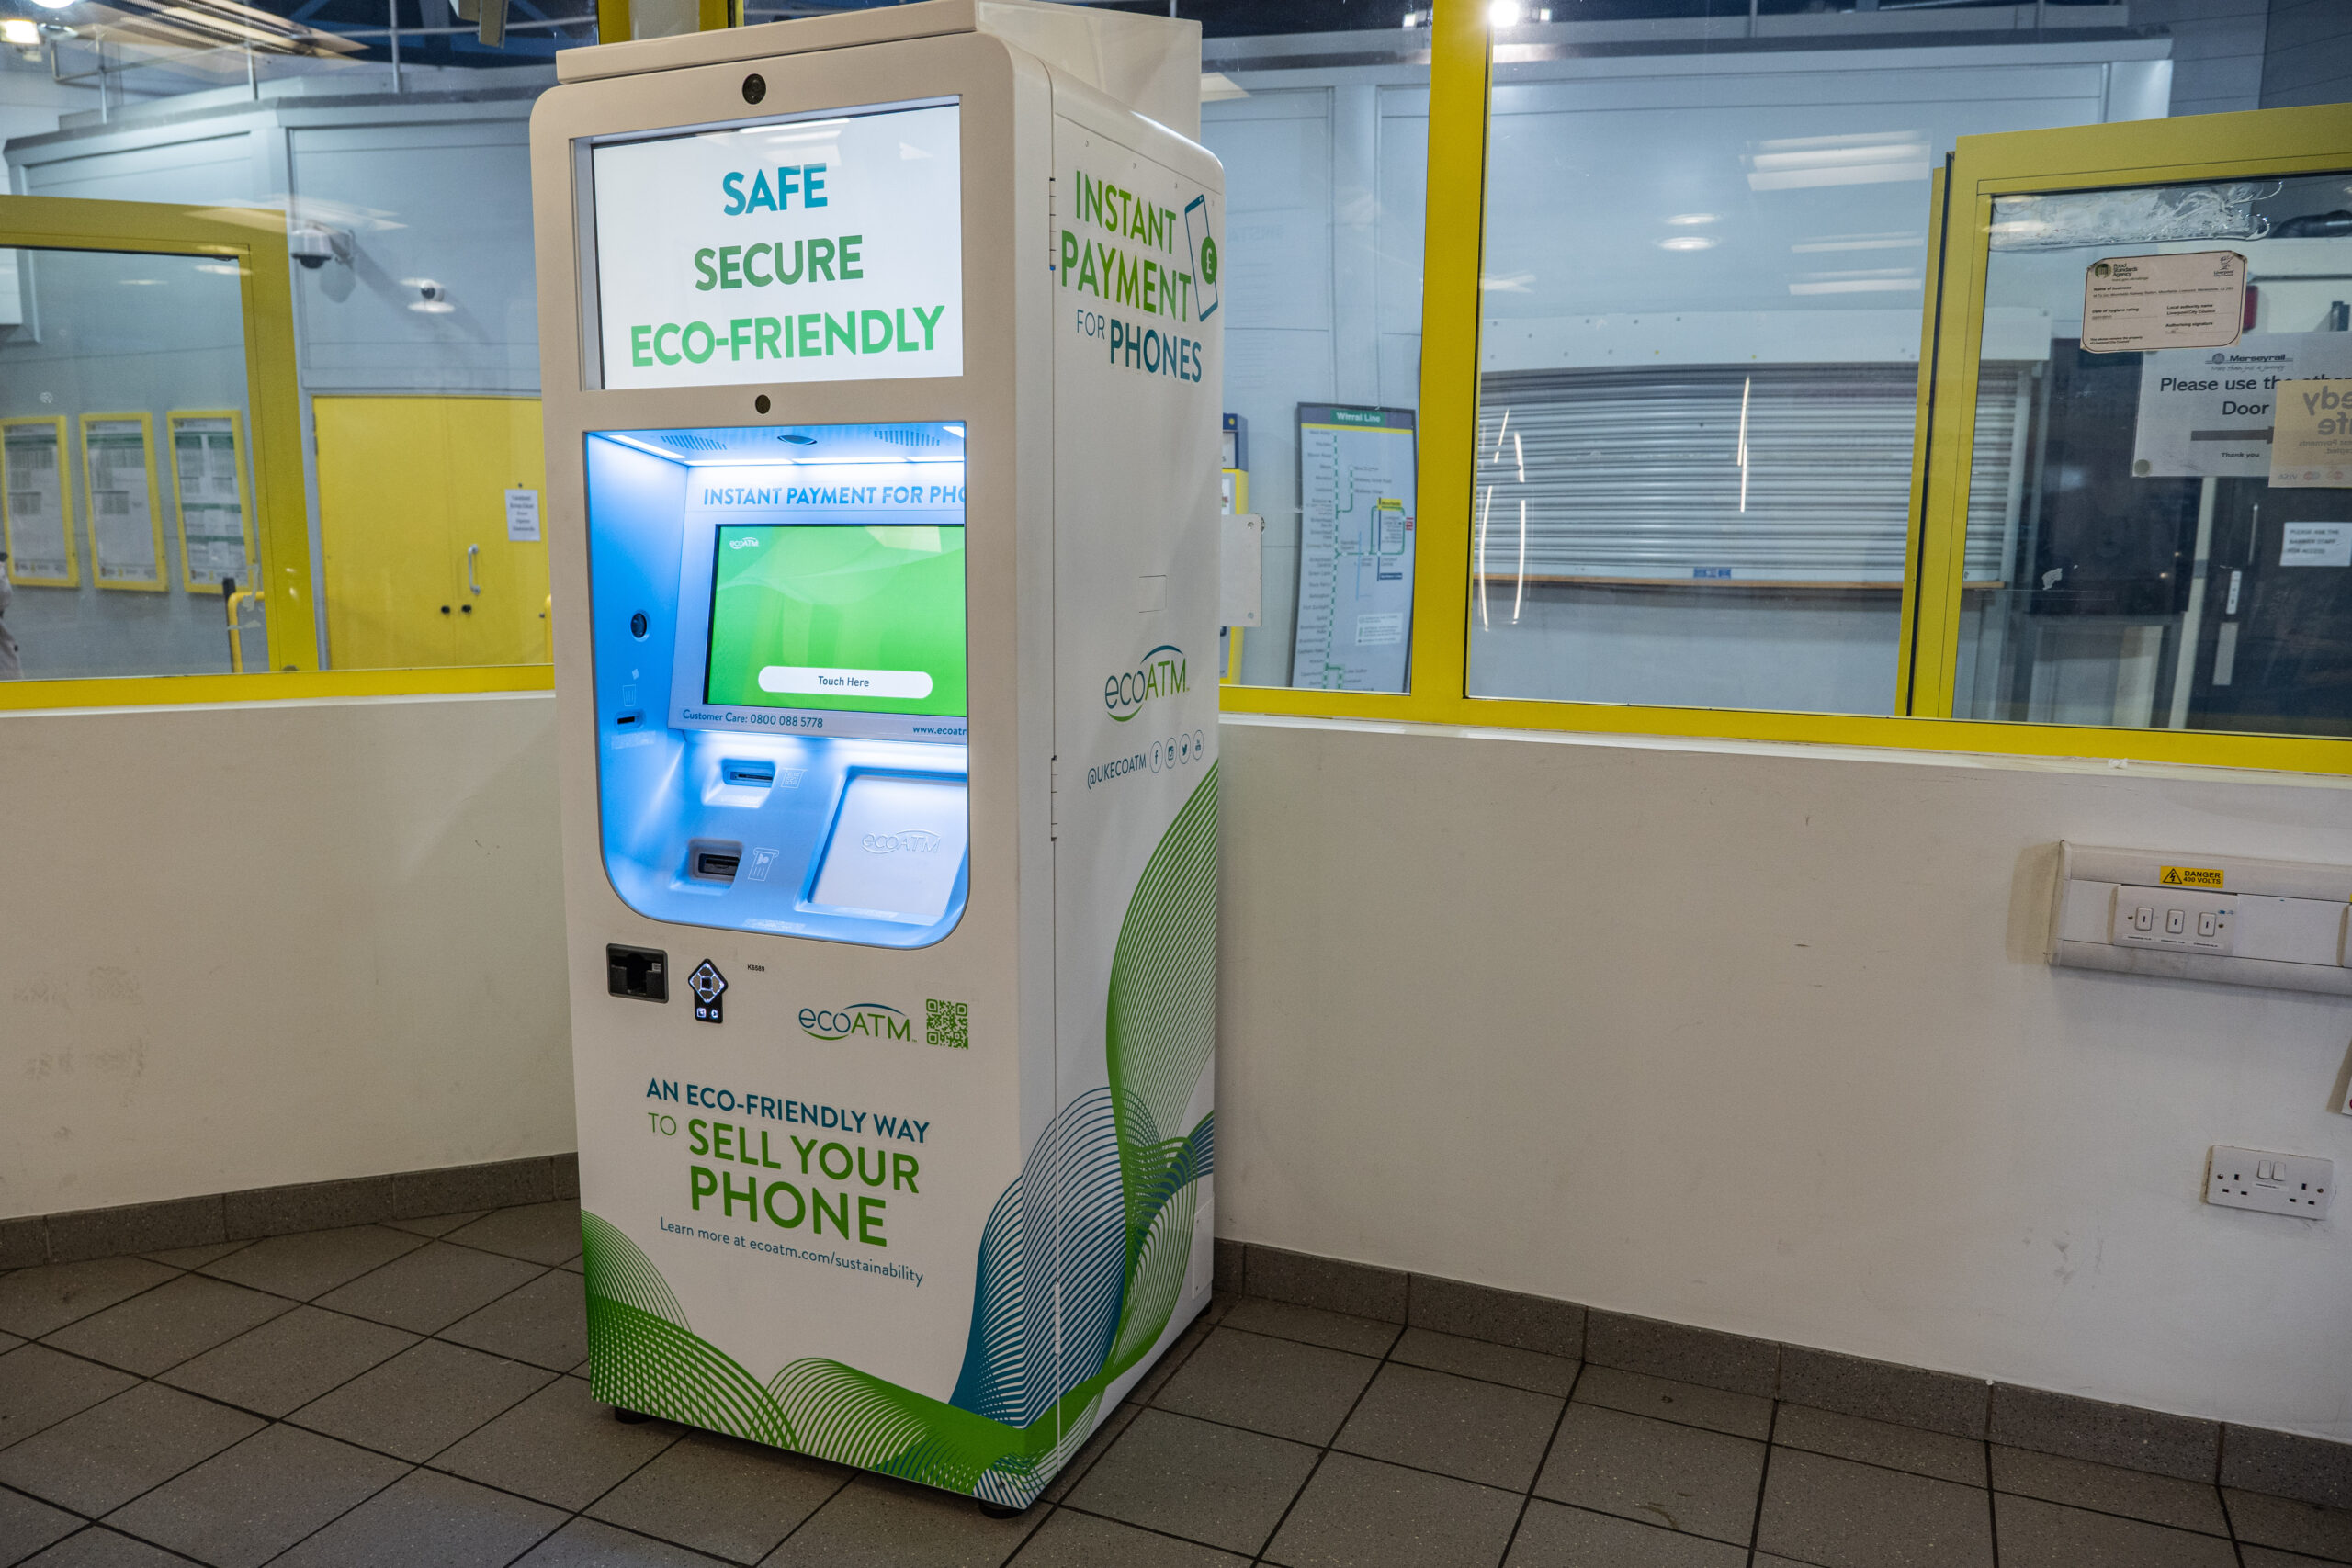 Merseyrail has teamed up with tech company ecoATM to give passengers the opportunity to turn in their used smartphones in return for instant payment